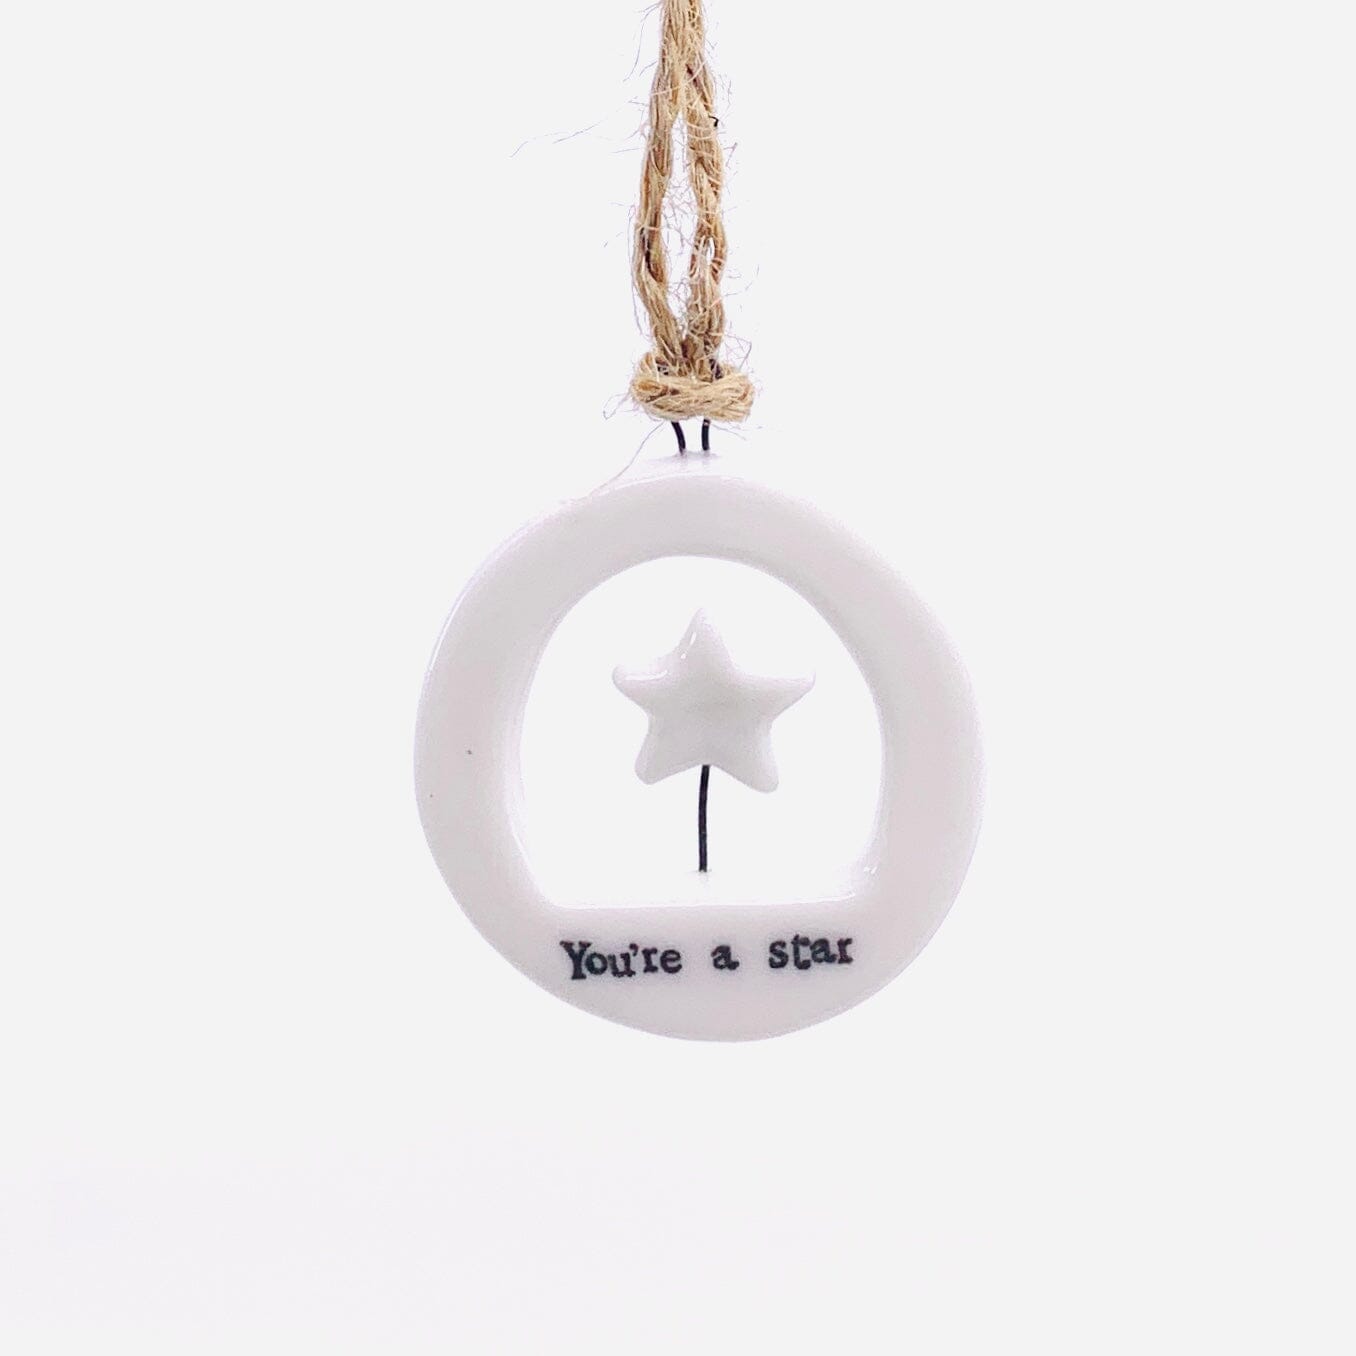 Porcelain Ornament, You’re a Star Ornament Two's Company 